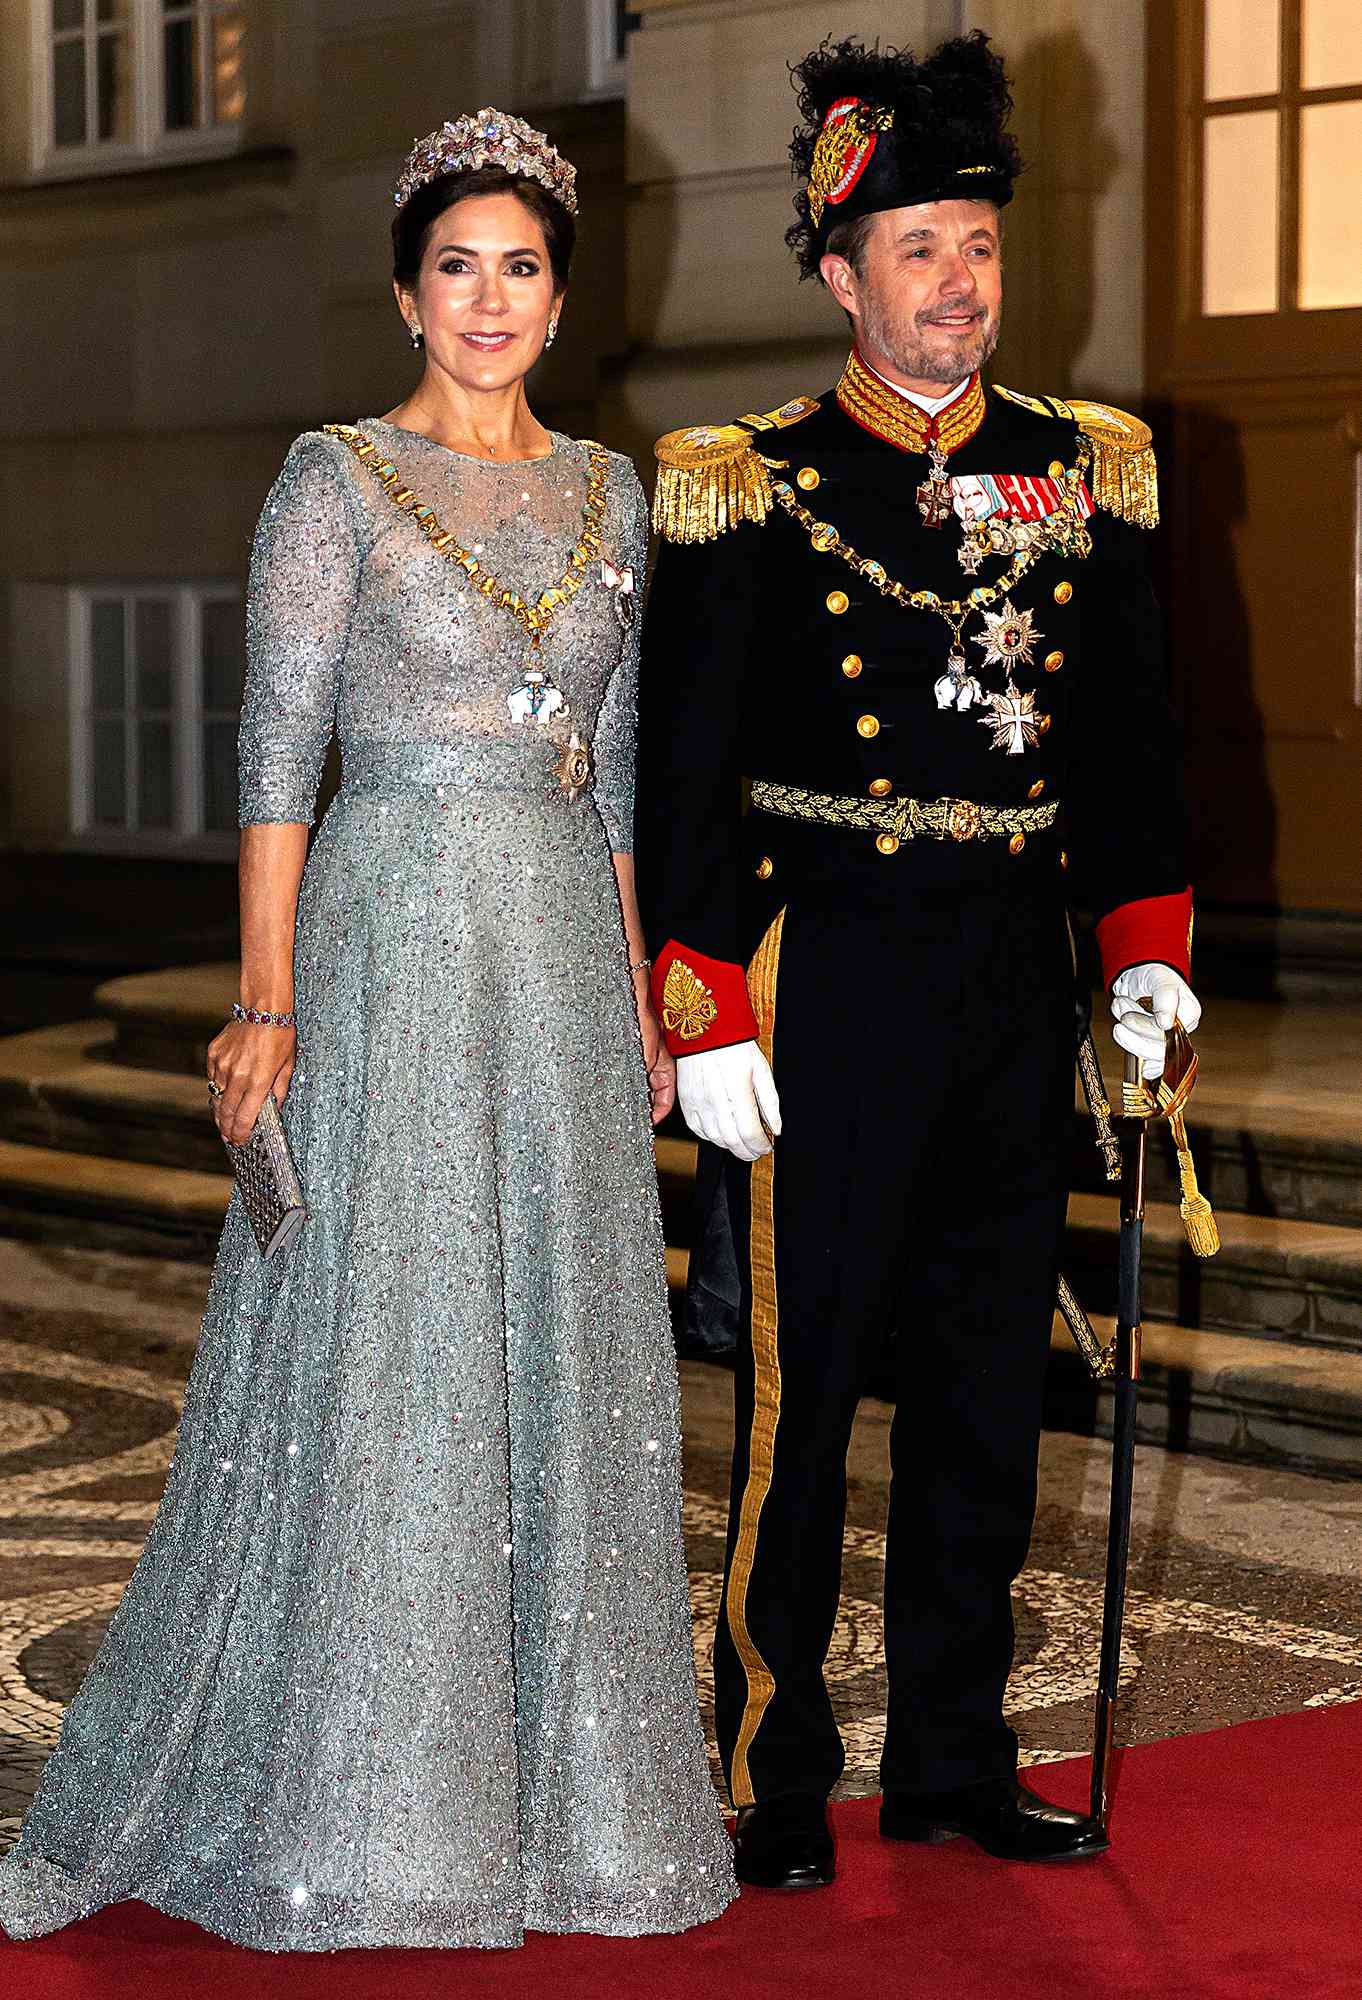  Crown Princess Mary of Denmark and Crown Prince Frederik of Denmark arrive at Queen Margrethe of Denmark's New Year's levee